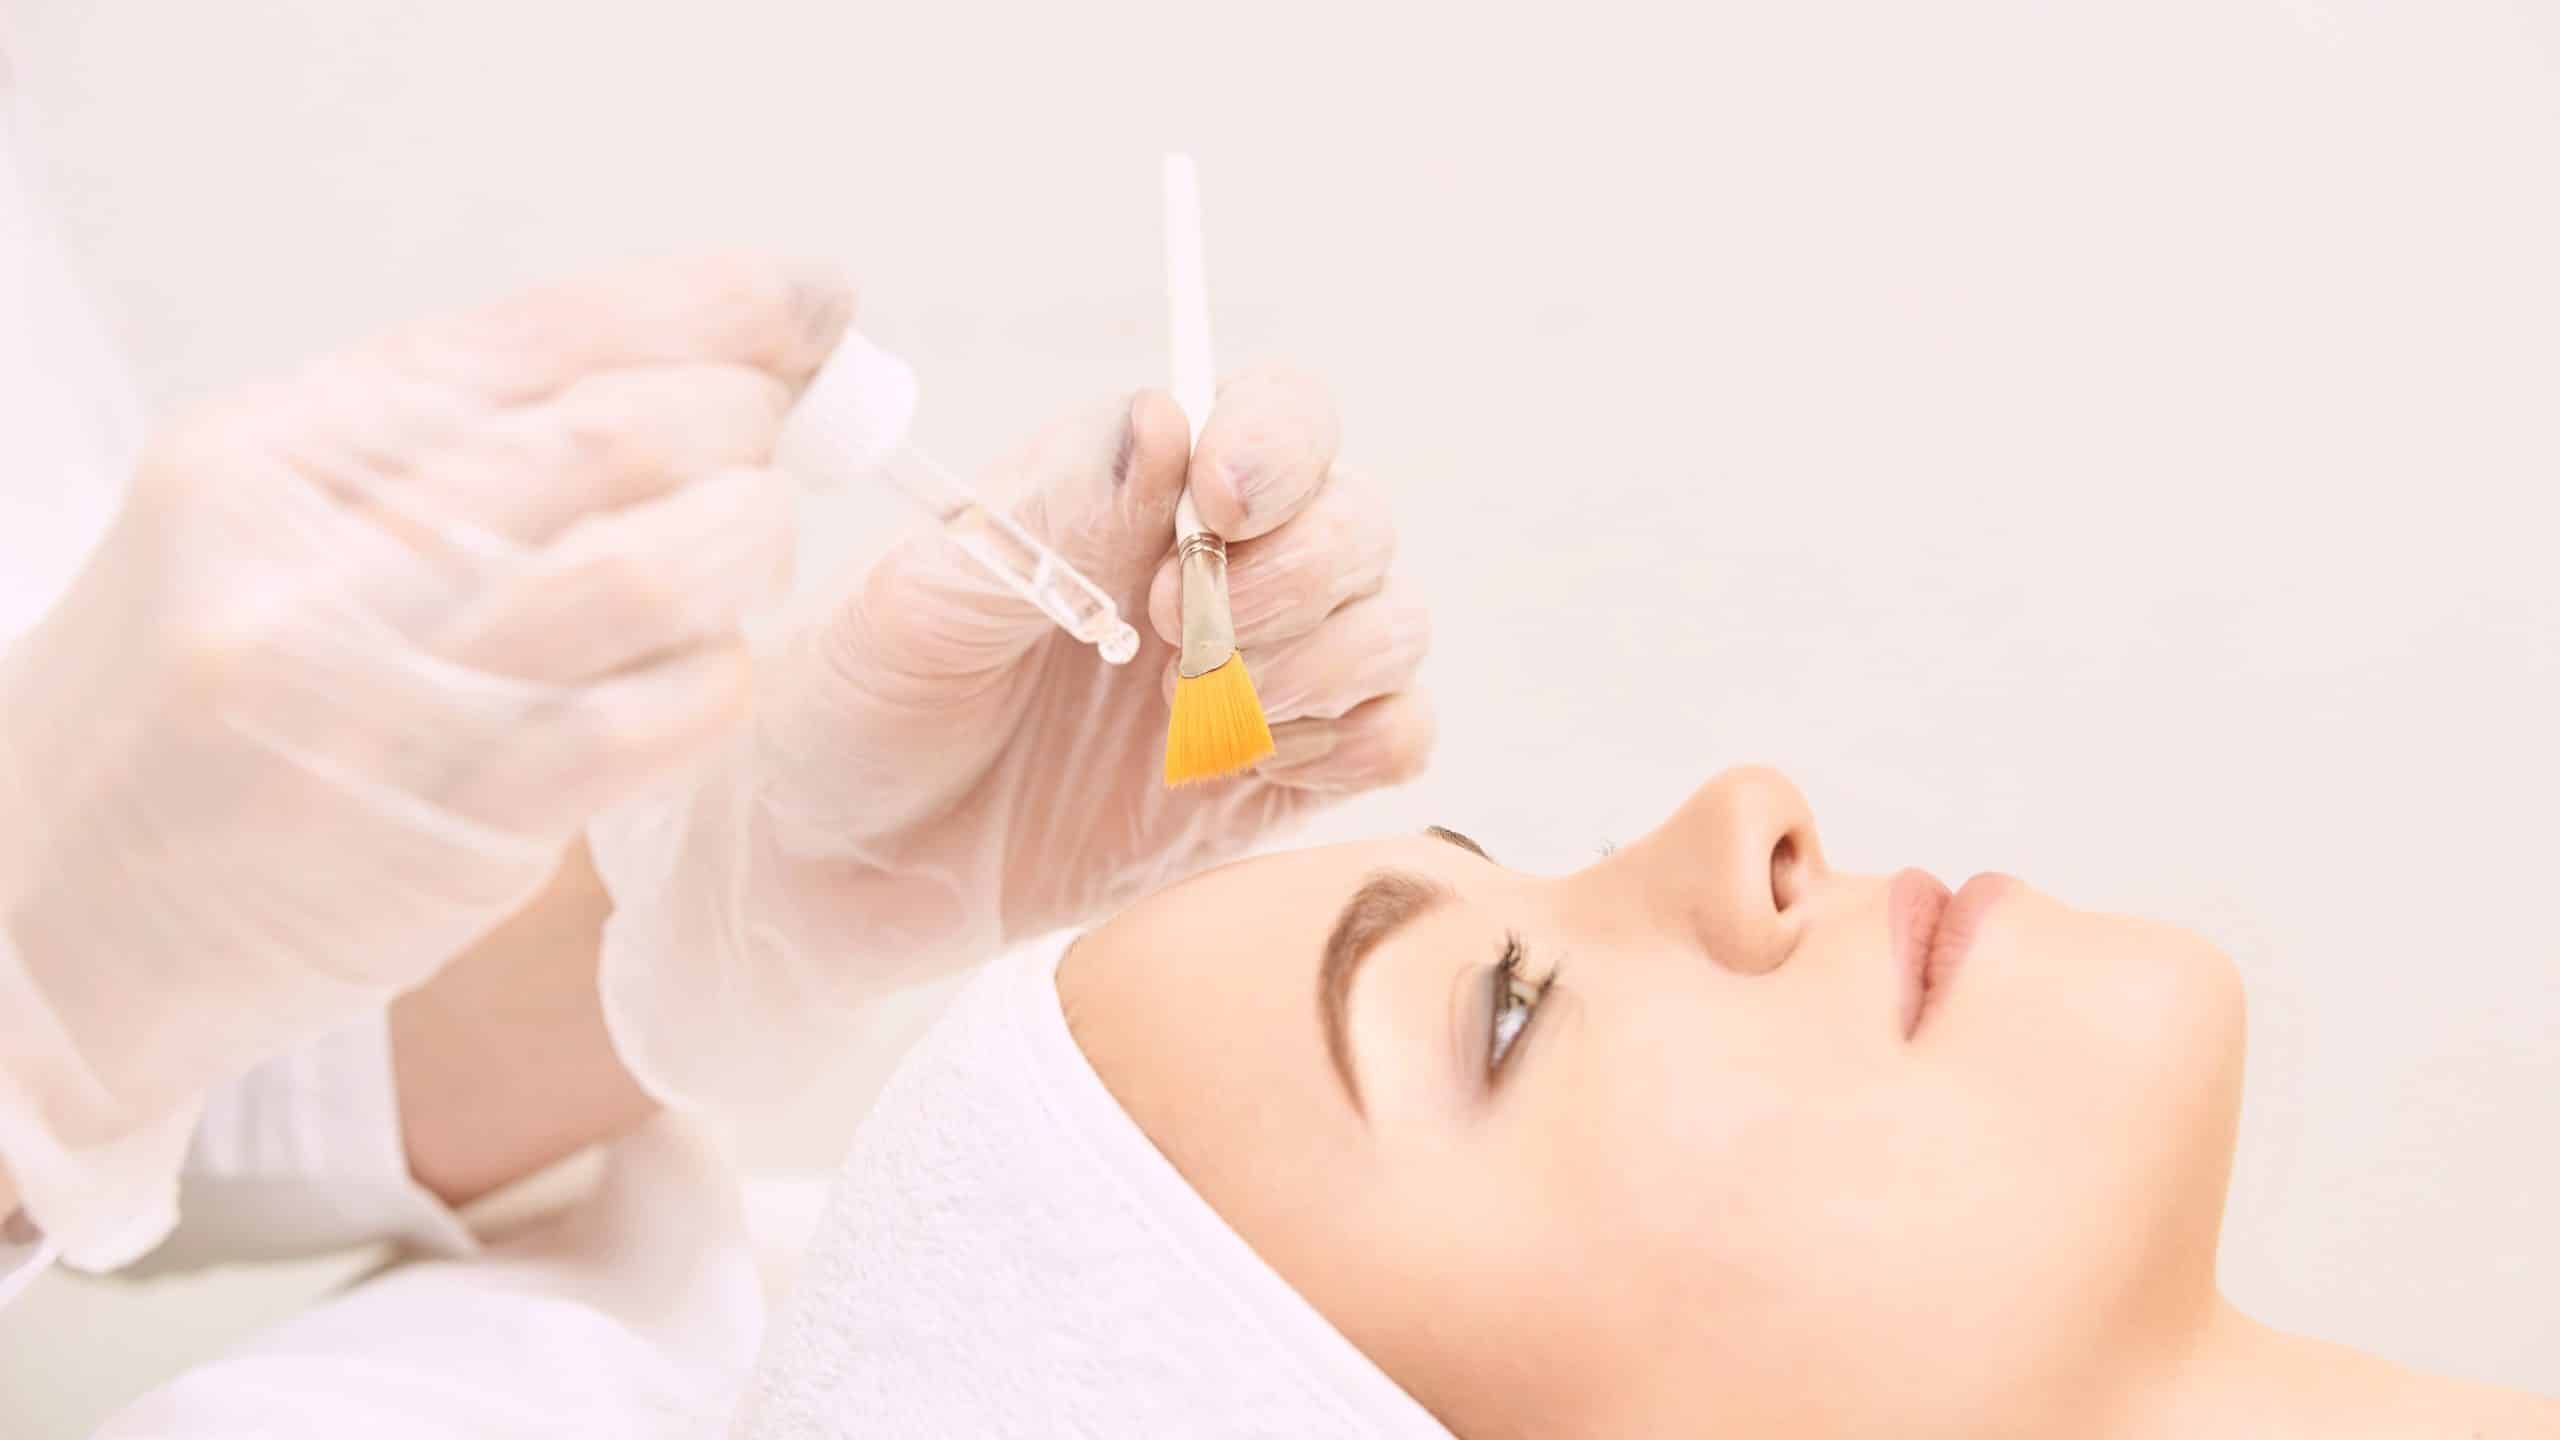 What Chemical Peel is The Best For Superficial Acne Pitted Scars